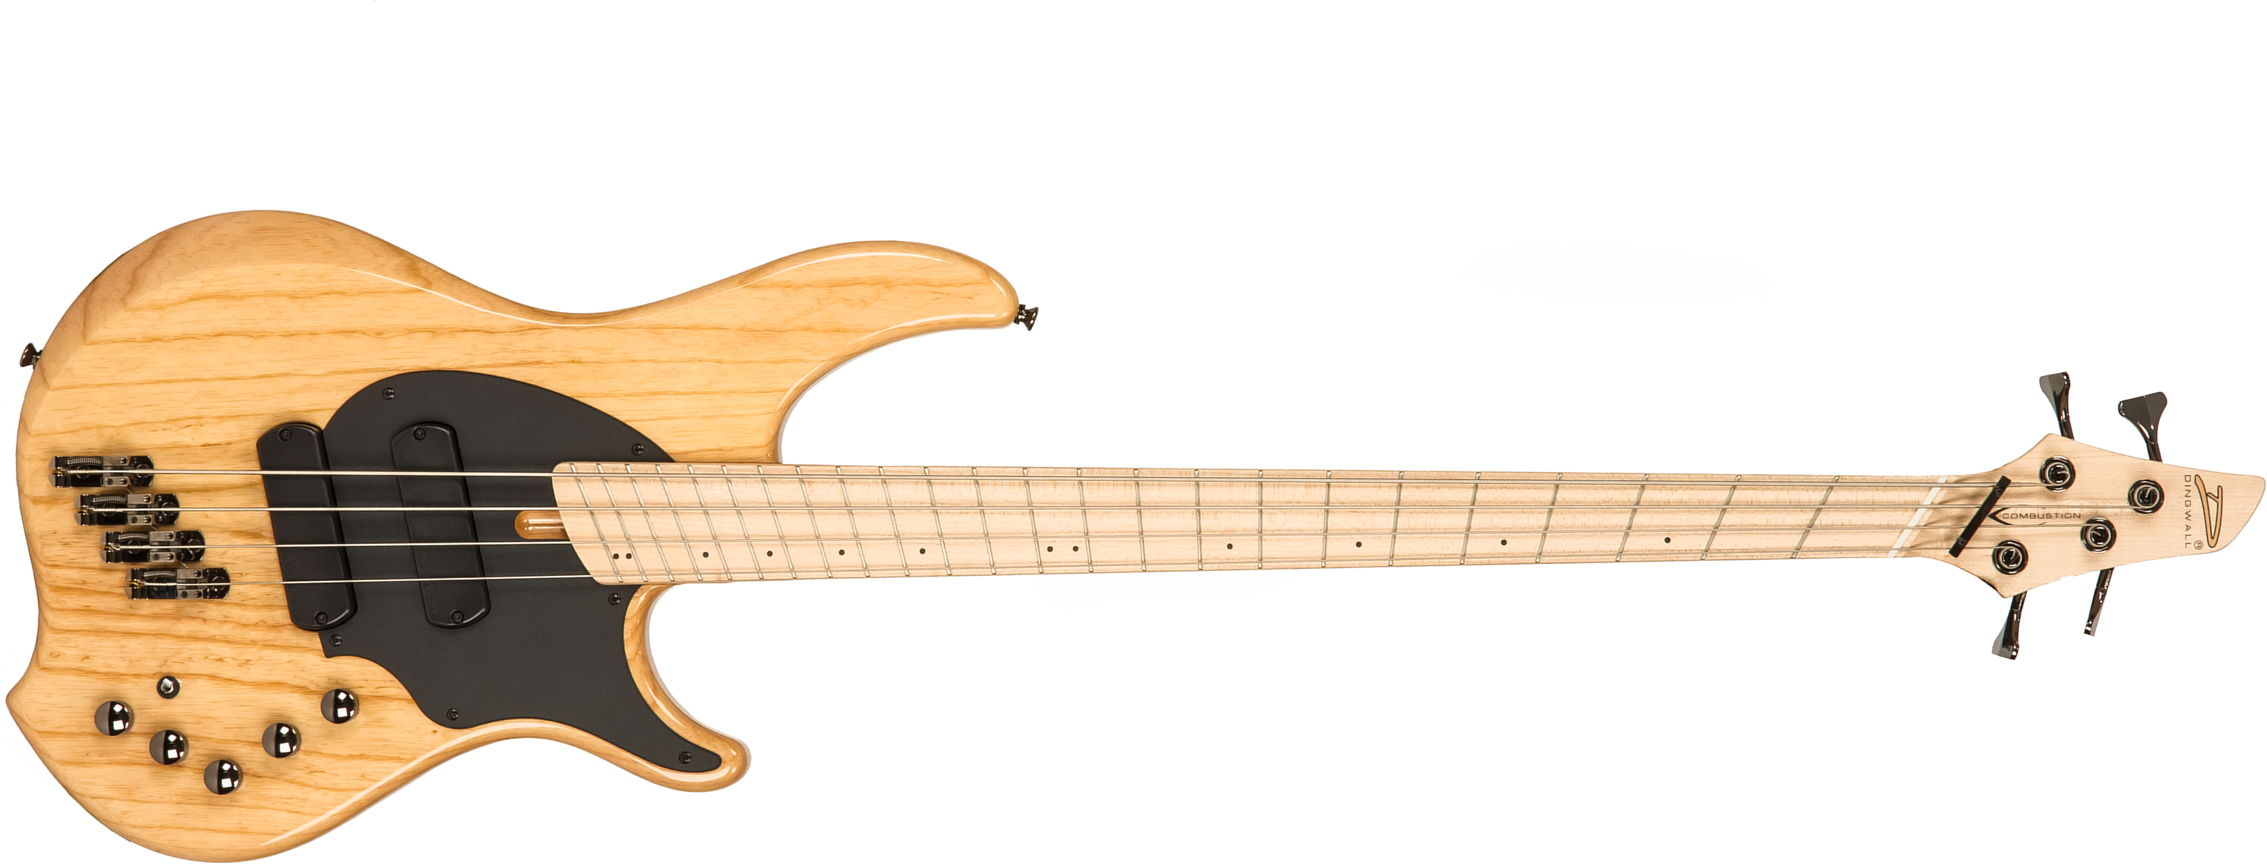 Dingwall Combustion Cb2 4c 2pu Mn - Natural - Solid body electric bass - Main picture